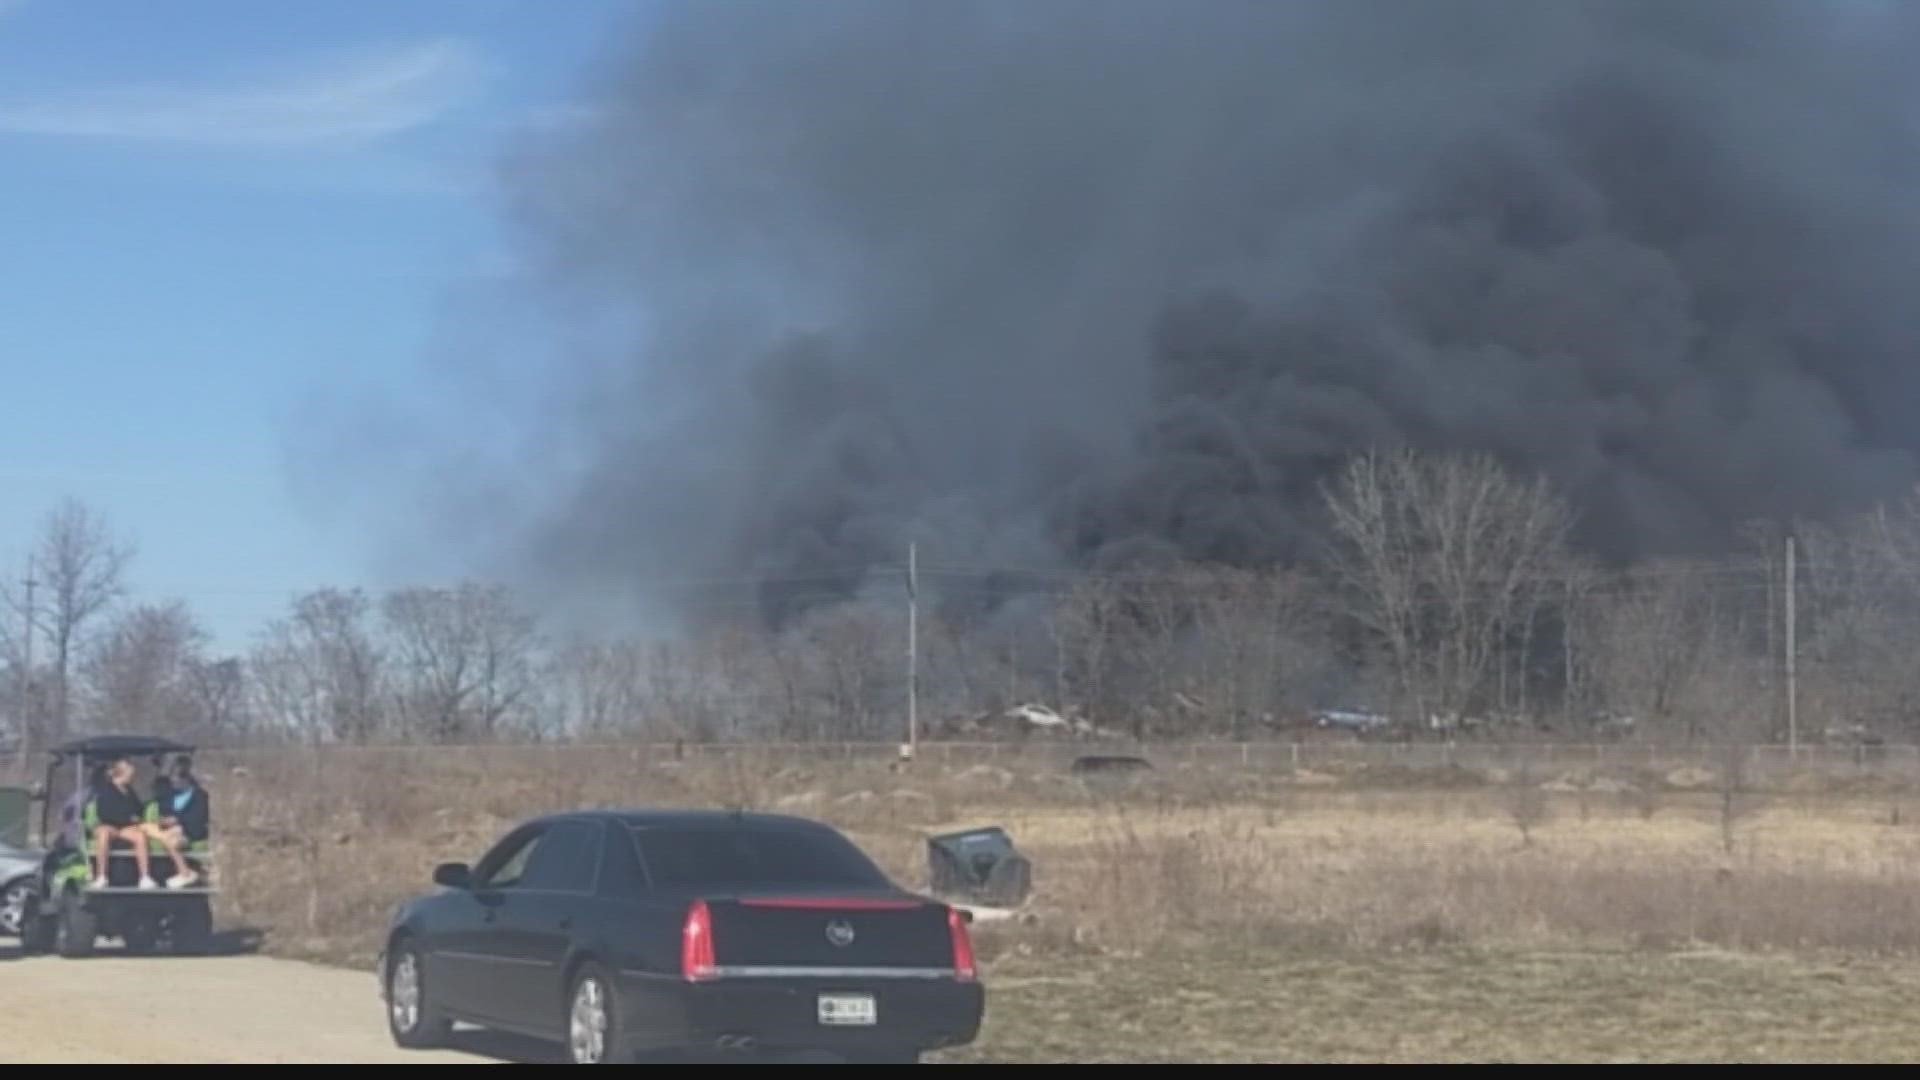 The fire began around 3 p.m. at Newco Metals near the old Mounds Mall on East 22nd Street.